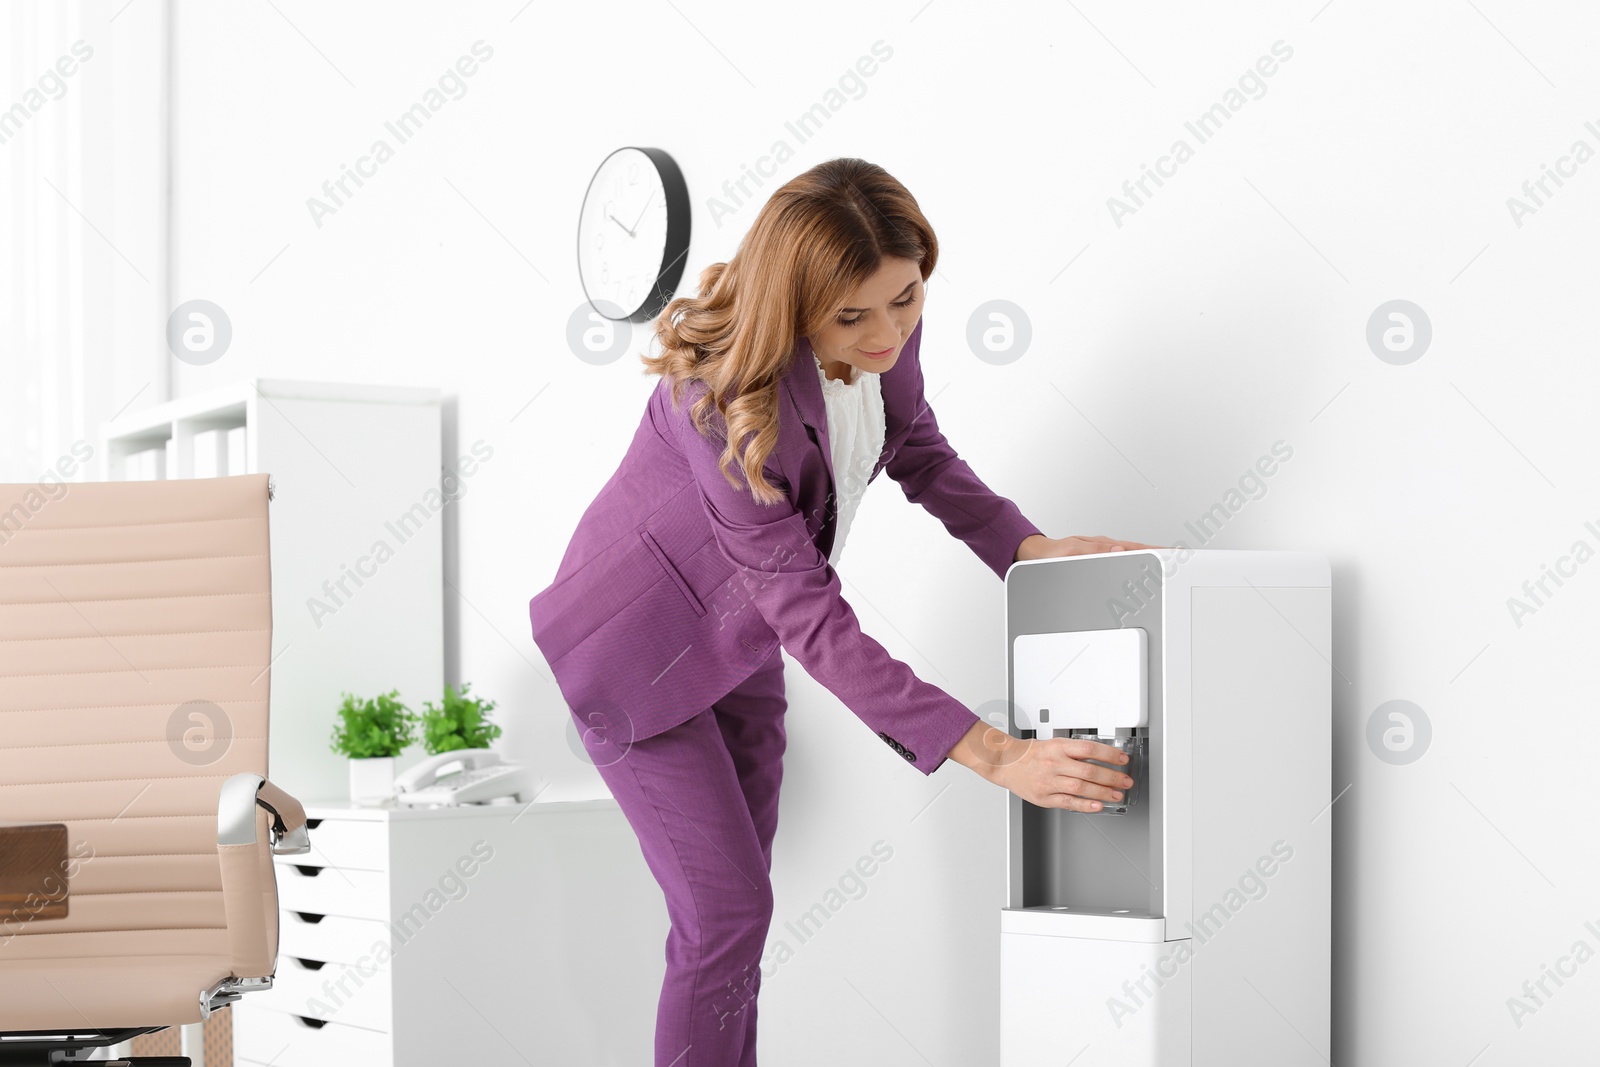 Photo of Woman having break near water cooler at workplace